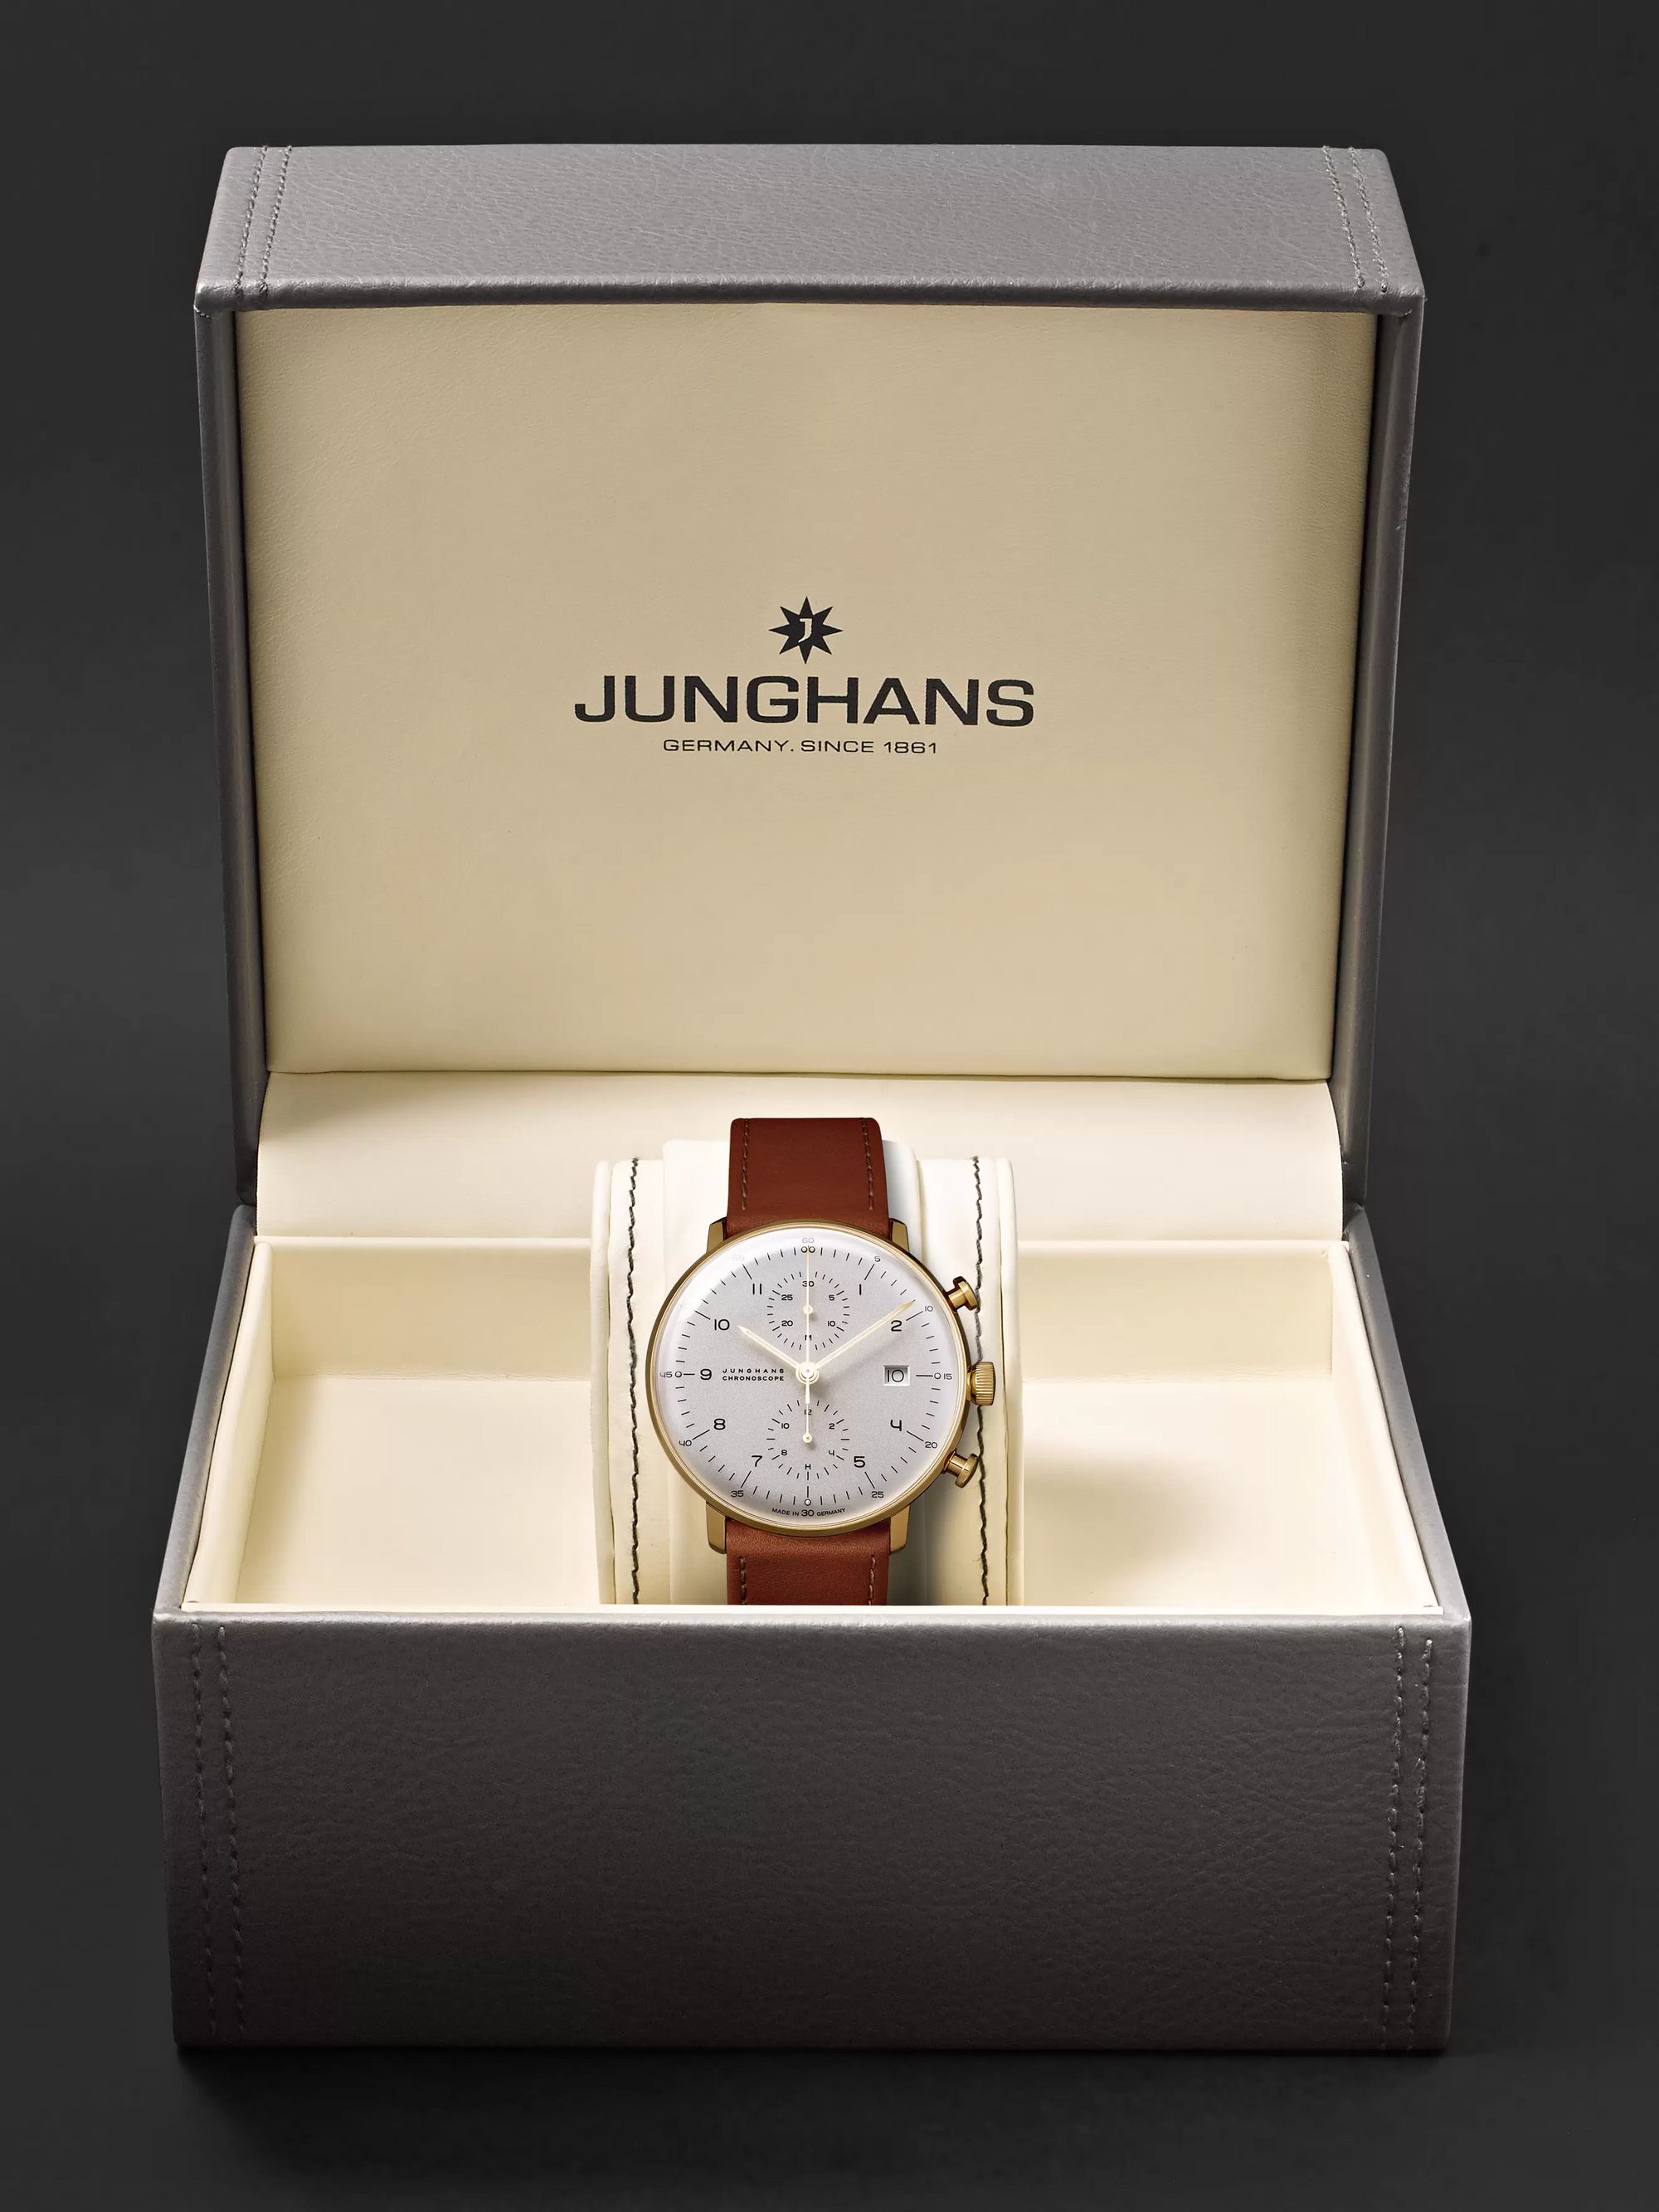 JUNGHANS Limited Edition Max Bill Chronoscope 40mm Stainless Steel and Leather Watch and Table Clock Set, Ref No. 363/2919.01